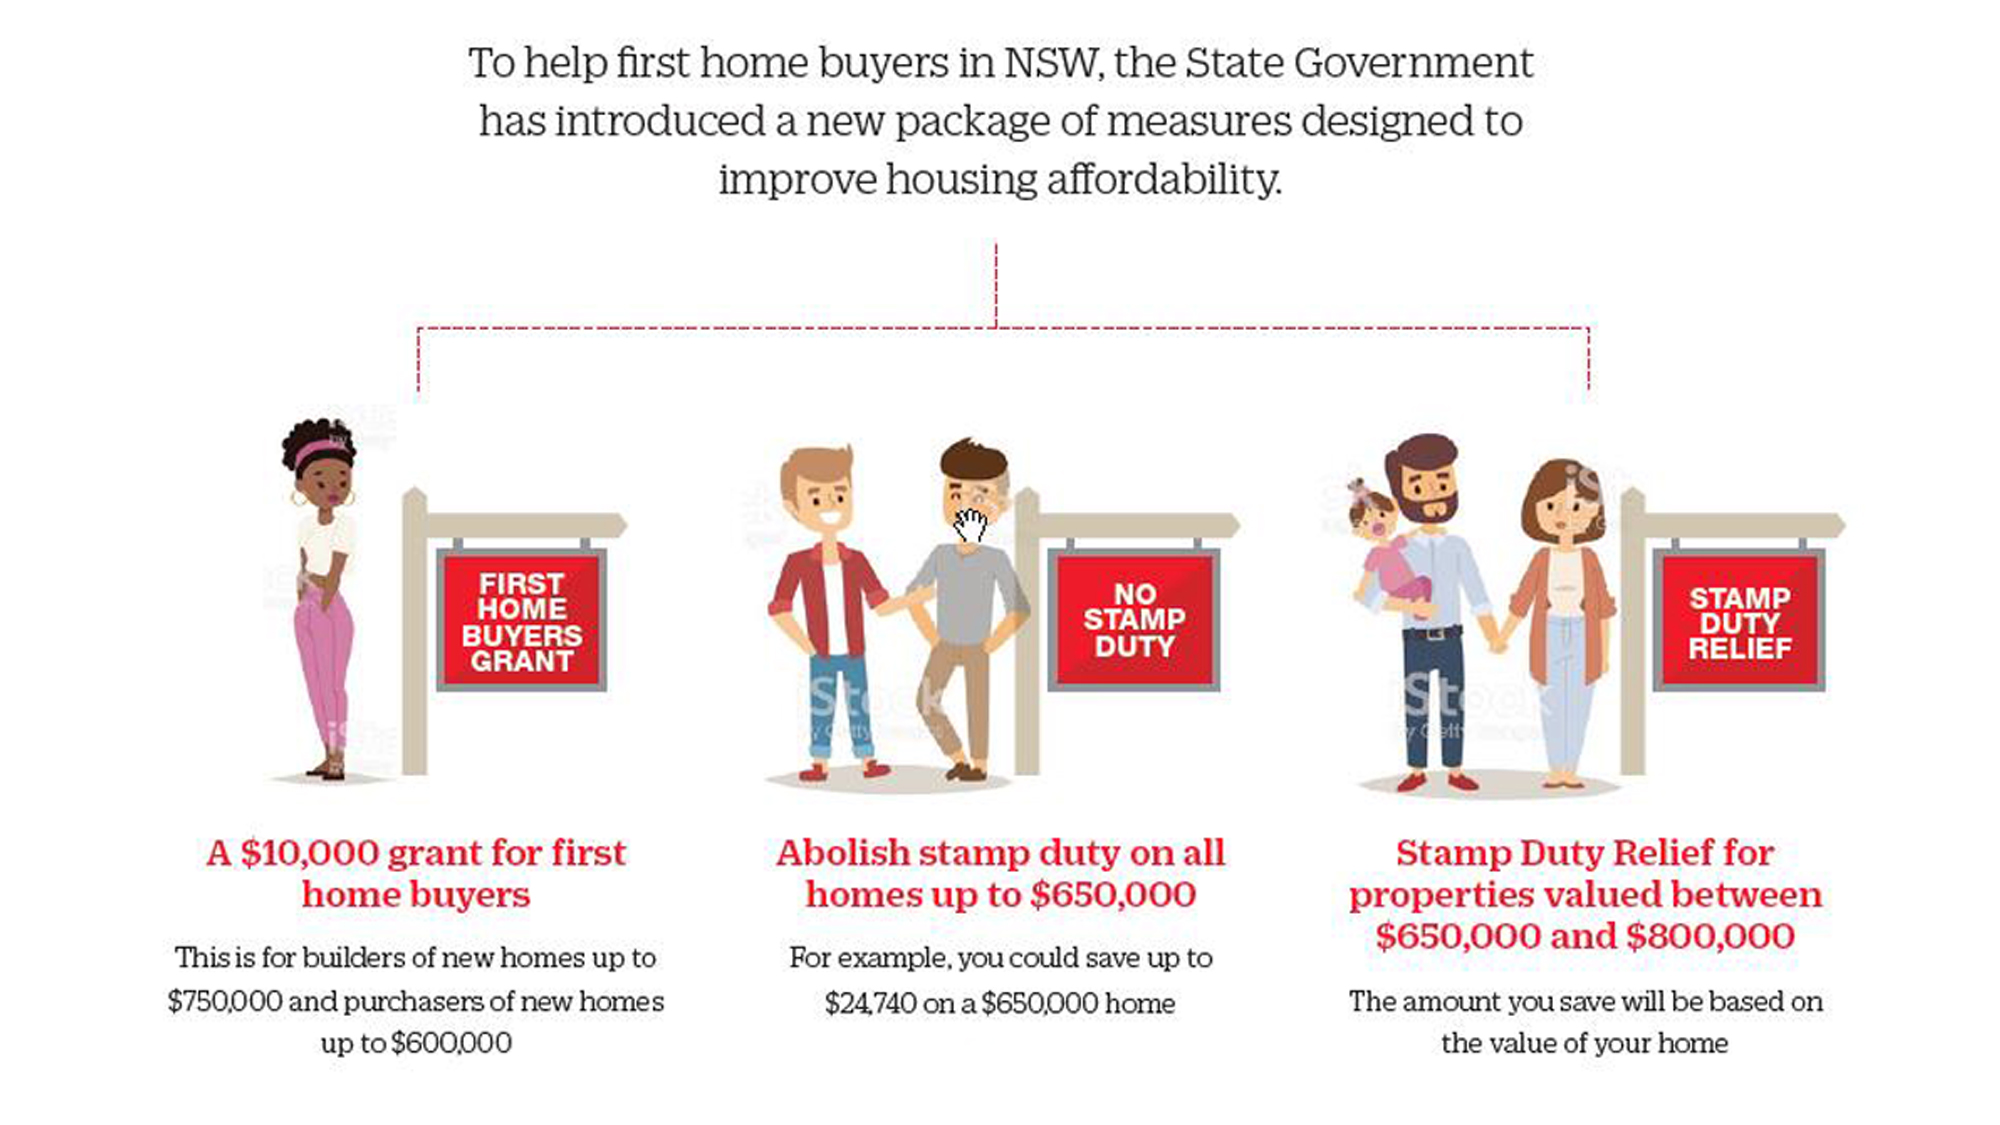 First Home Buyer incentives